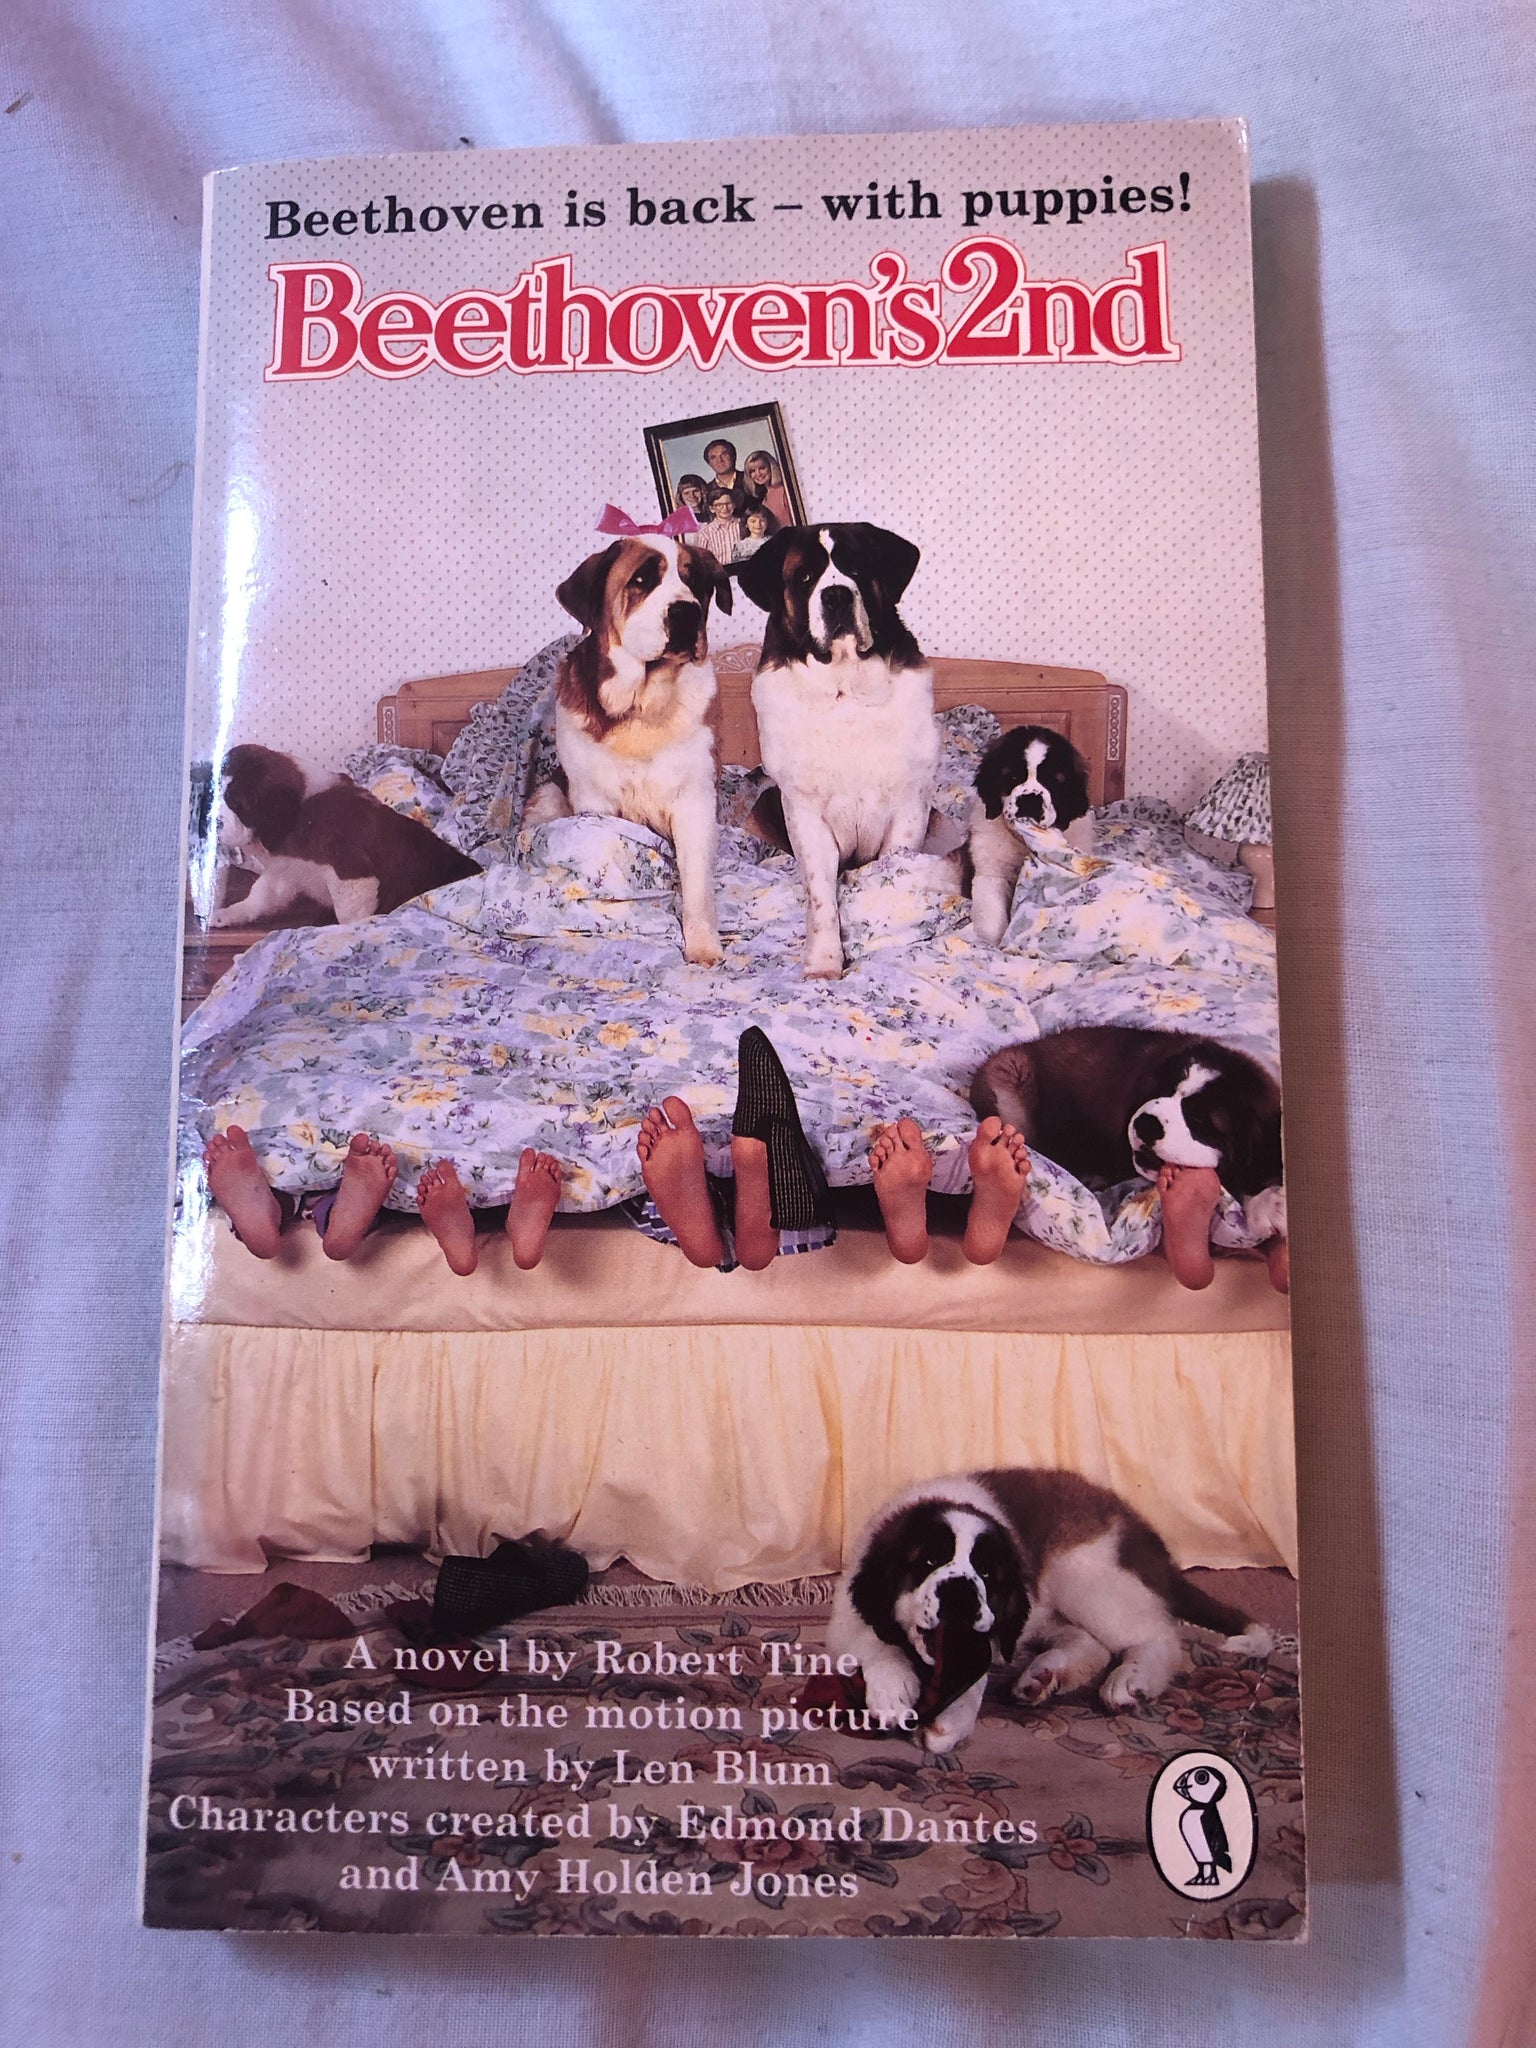 Beethoven’s 2nd by Robert Tine (Paperback 1993)